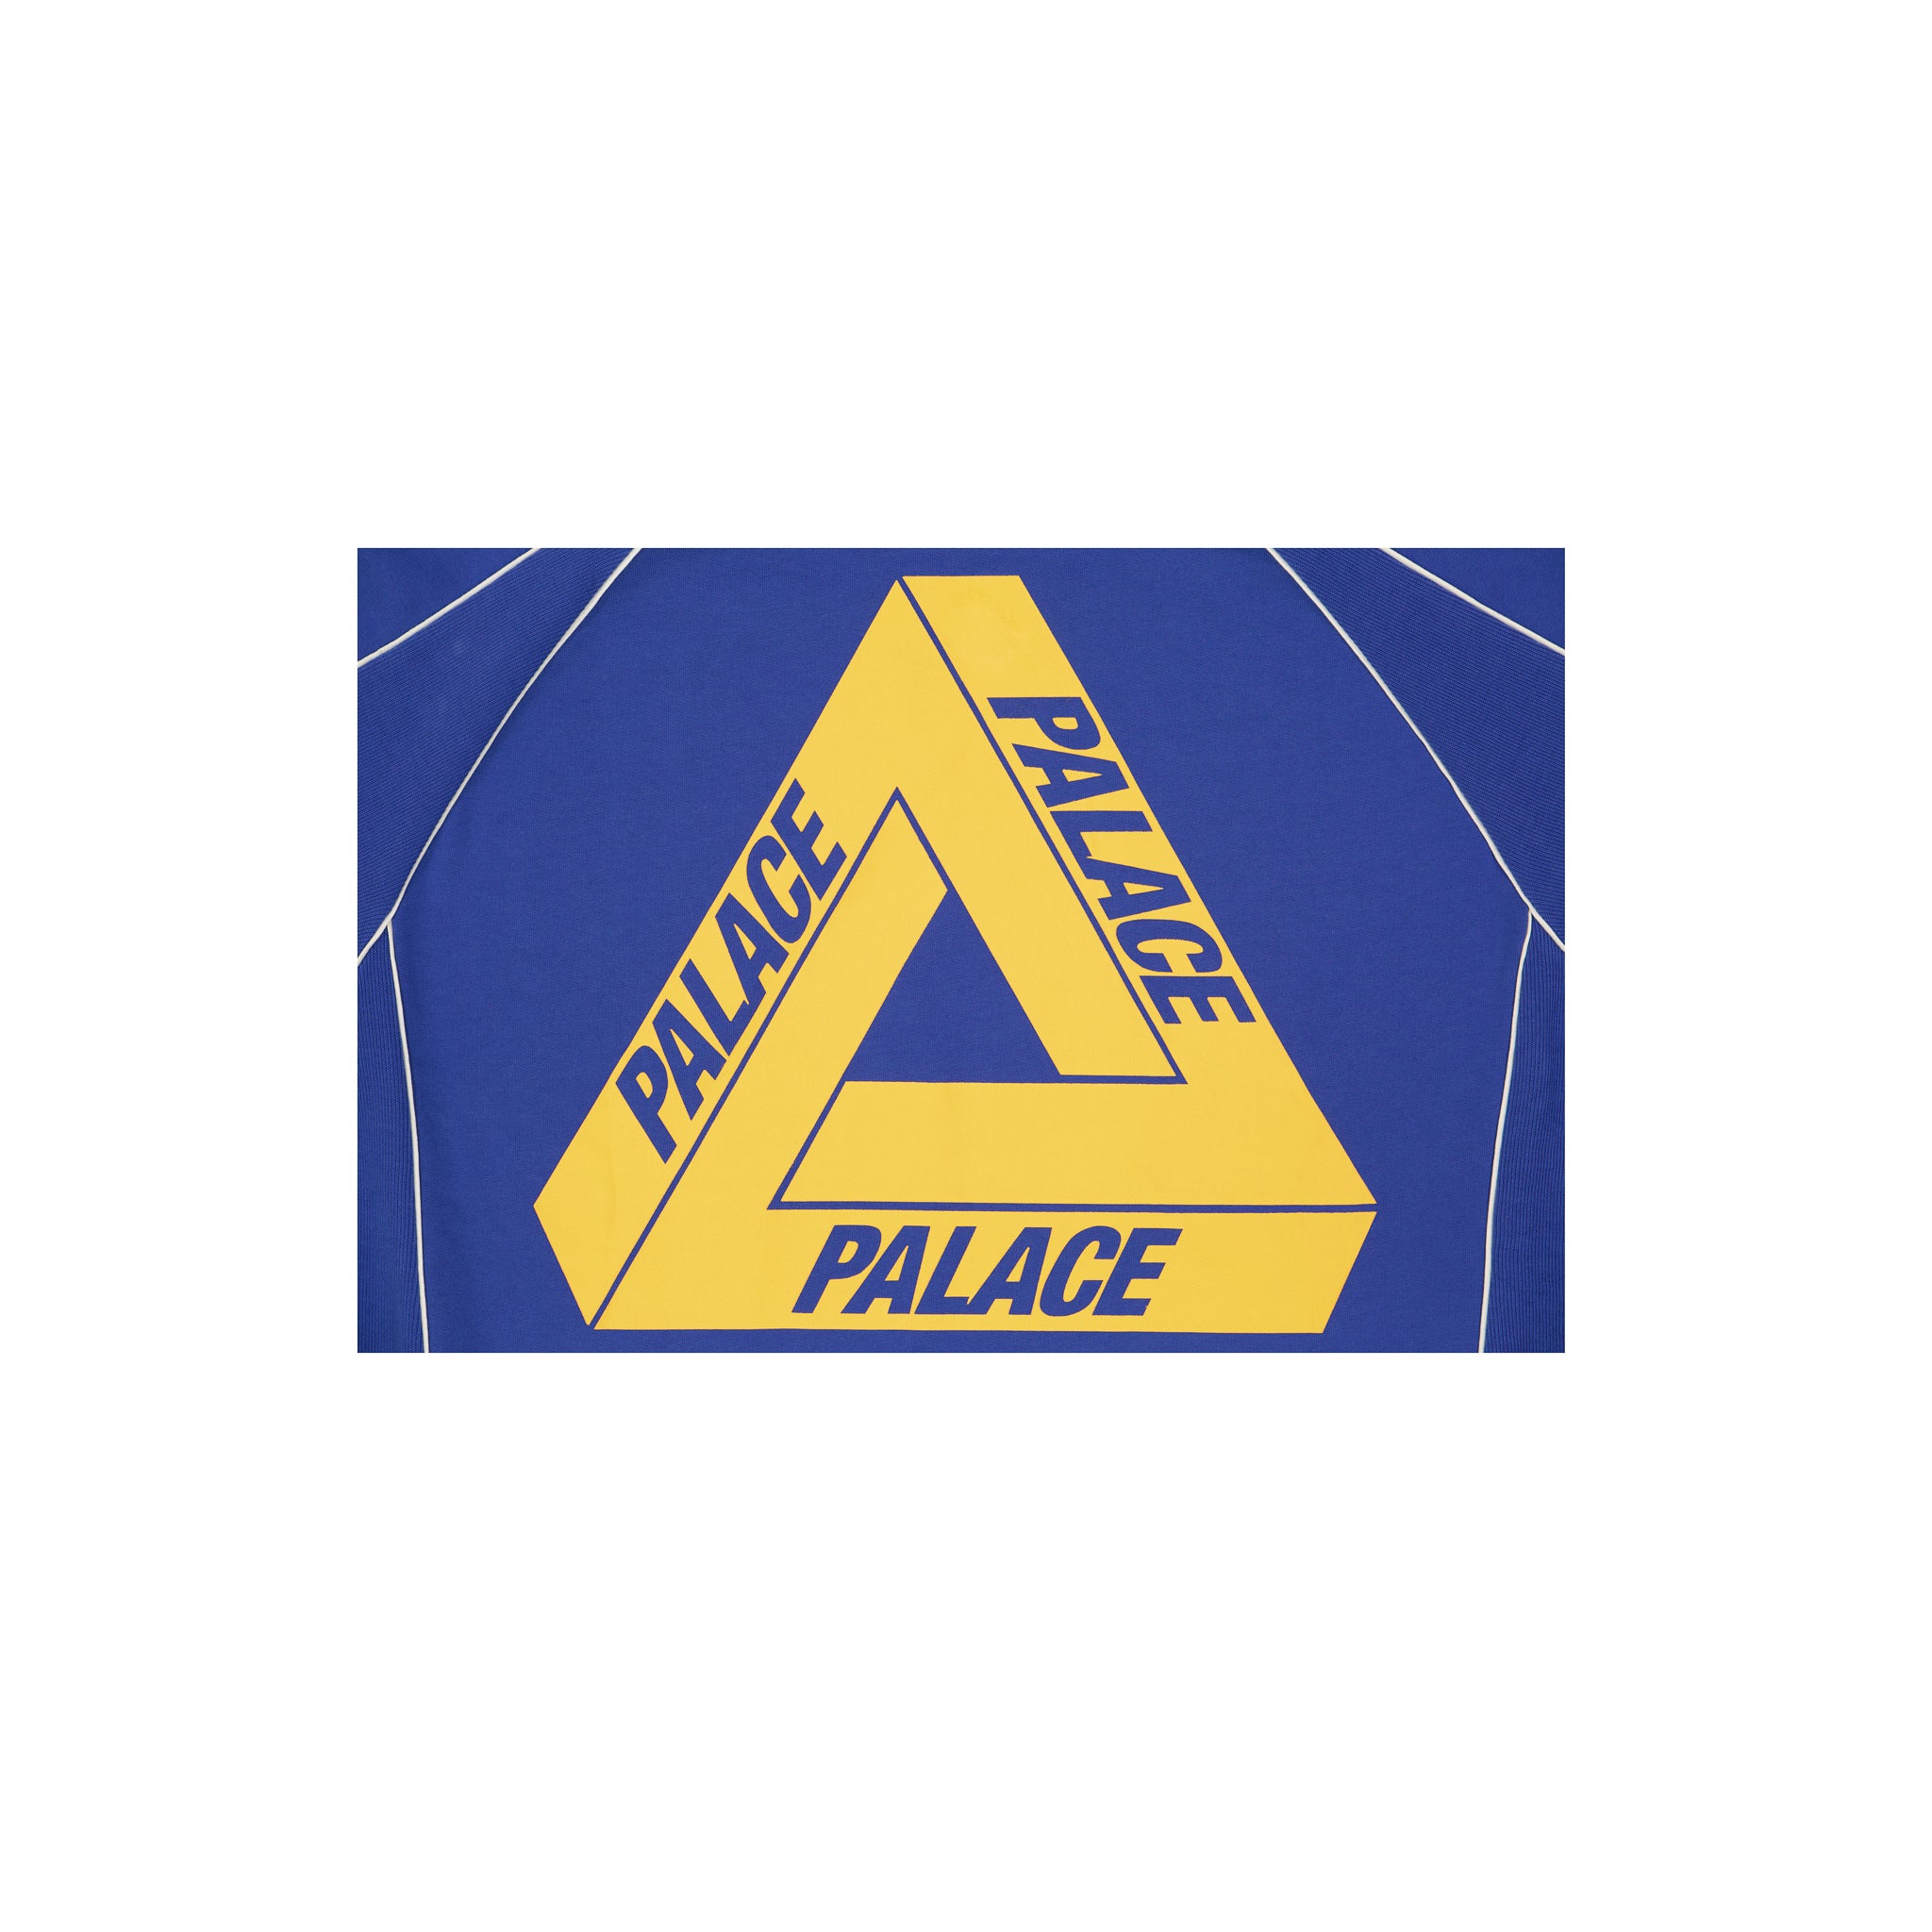 Palace Bowl Out Crew Blue